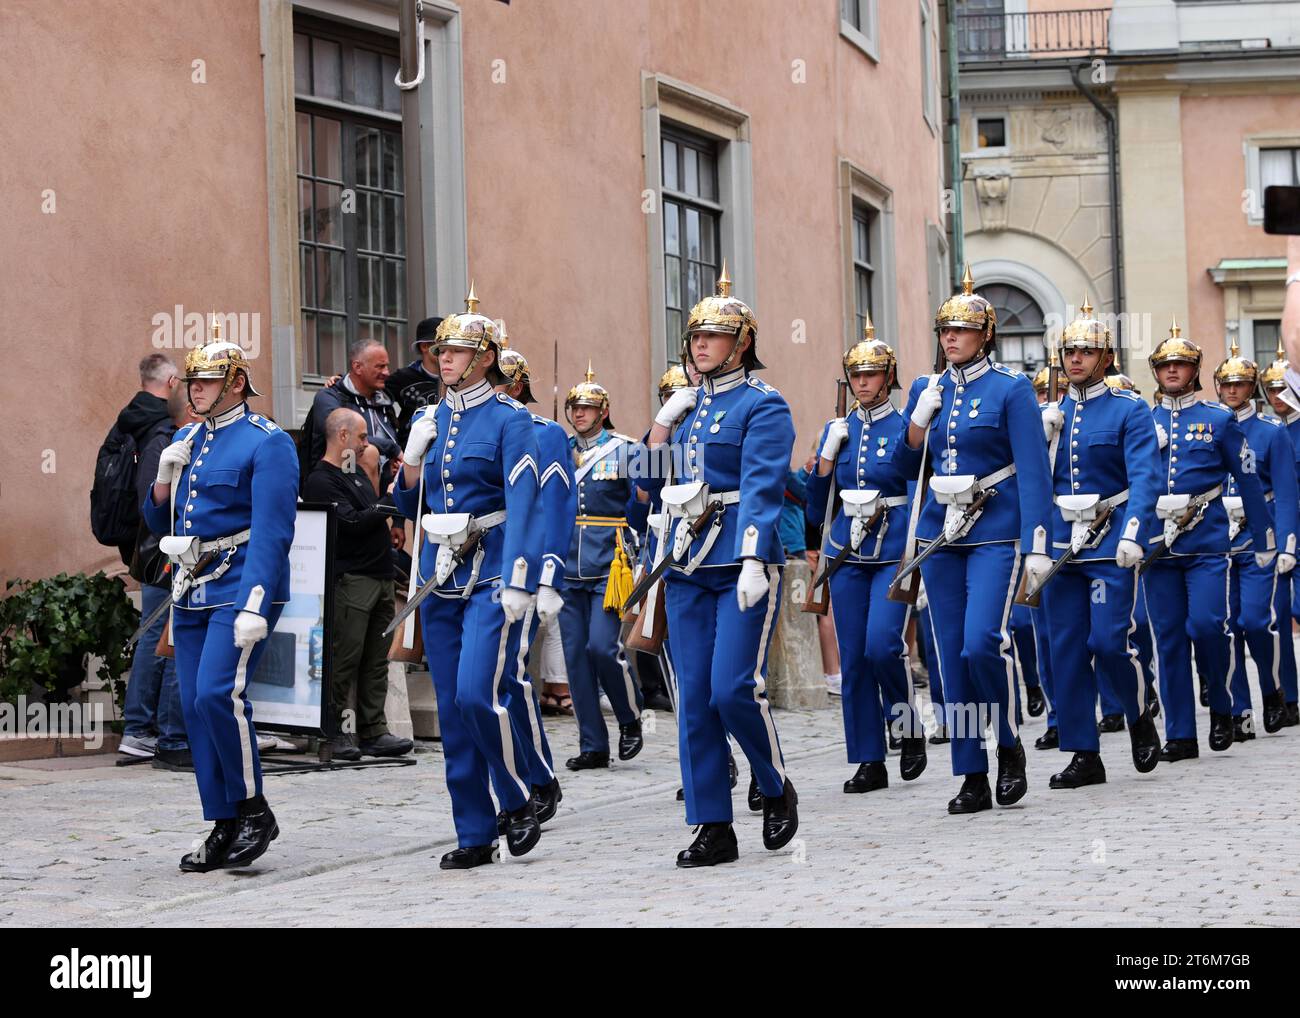 Stockholm, Sweden - June 26, 2023: Changing of the Guard ceremony at the Royal Palace in Stockholm, Sweden Stock Photo